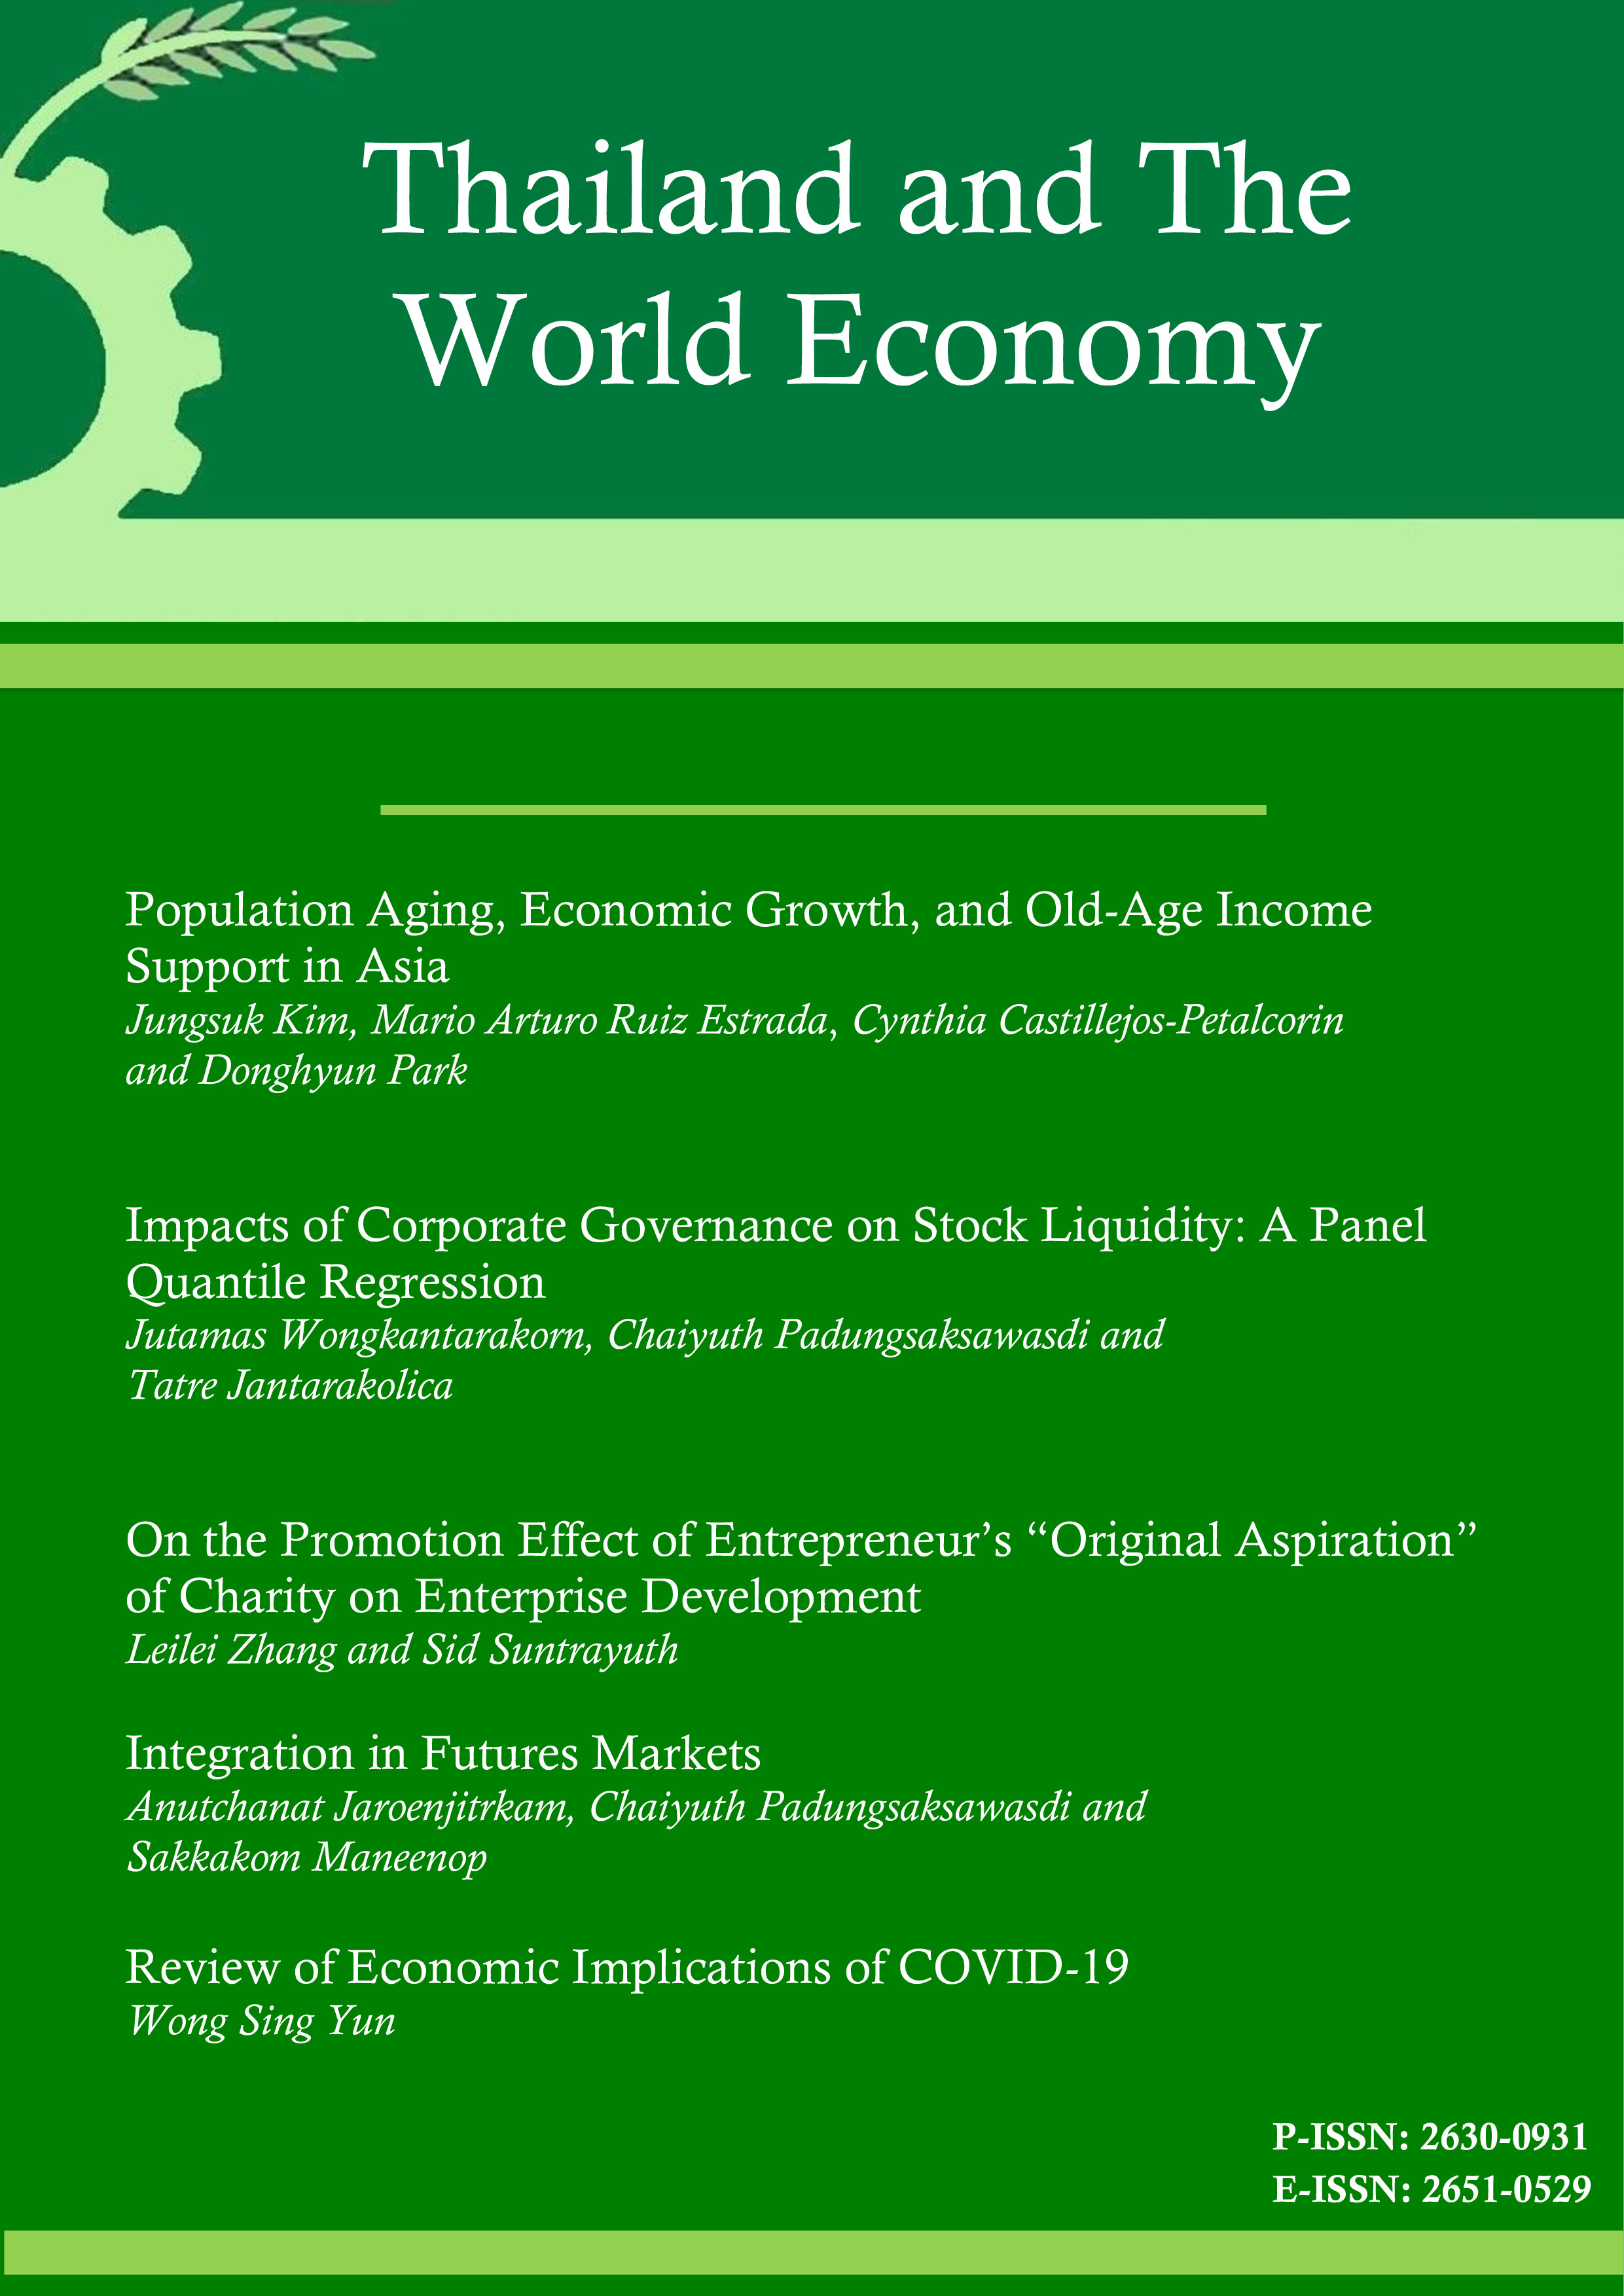 					View Vol. 38 No. 3 (2020): Thailand and the World Economy
				